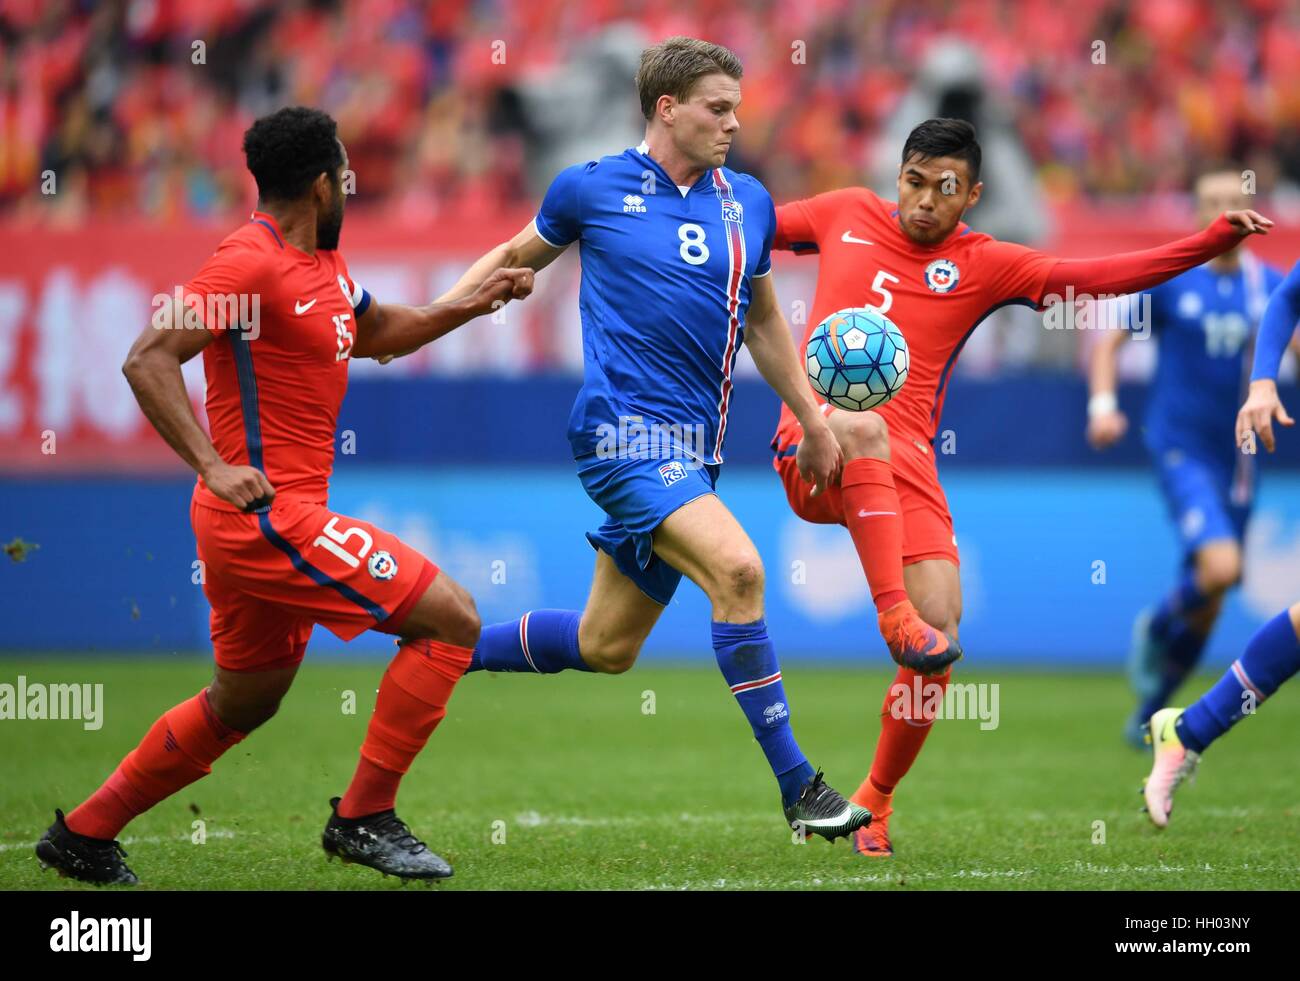 Nanning, China's Guangxi Zhuang Autonomous Region. 11th Jan, 2017. Bjorn Bergmann Siguroarson (C) of Iceland vies with Paulo Diaz (R) and Jean Beausejour (L) of Chile during the final match at 2017 China Cup International Football Championship in Nanning, capital of south China's Guangxi Zhuang Autonomous Region, Jan. 11, 2017. Chile beat Iceland 1-0. Credit: Guo Yong/Xinhua/Alamy Live News Stock Photo